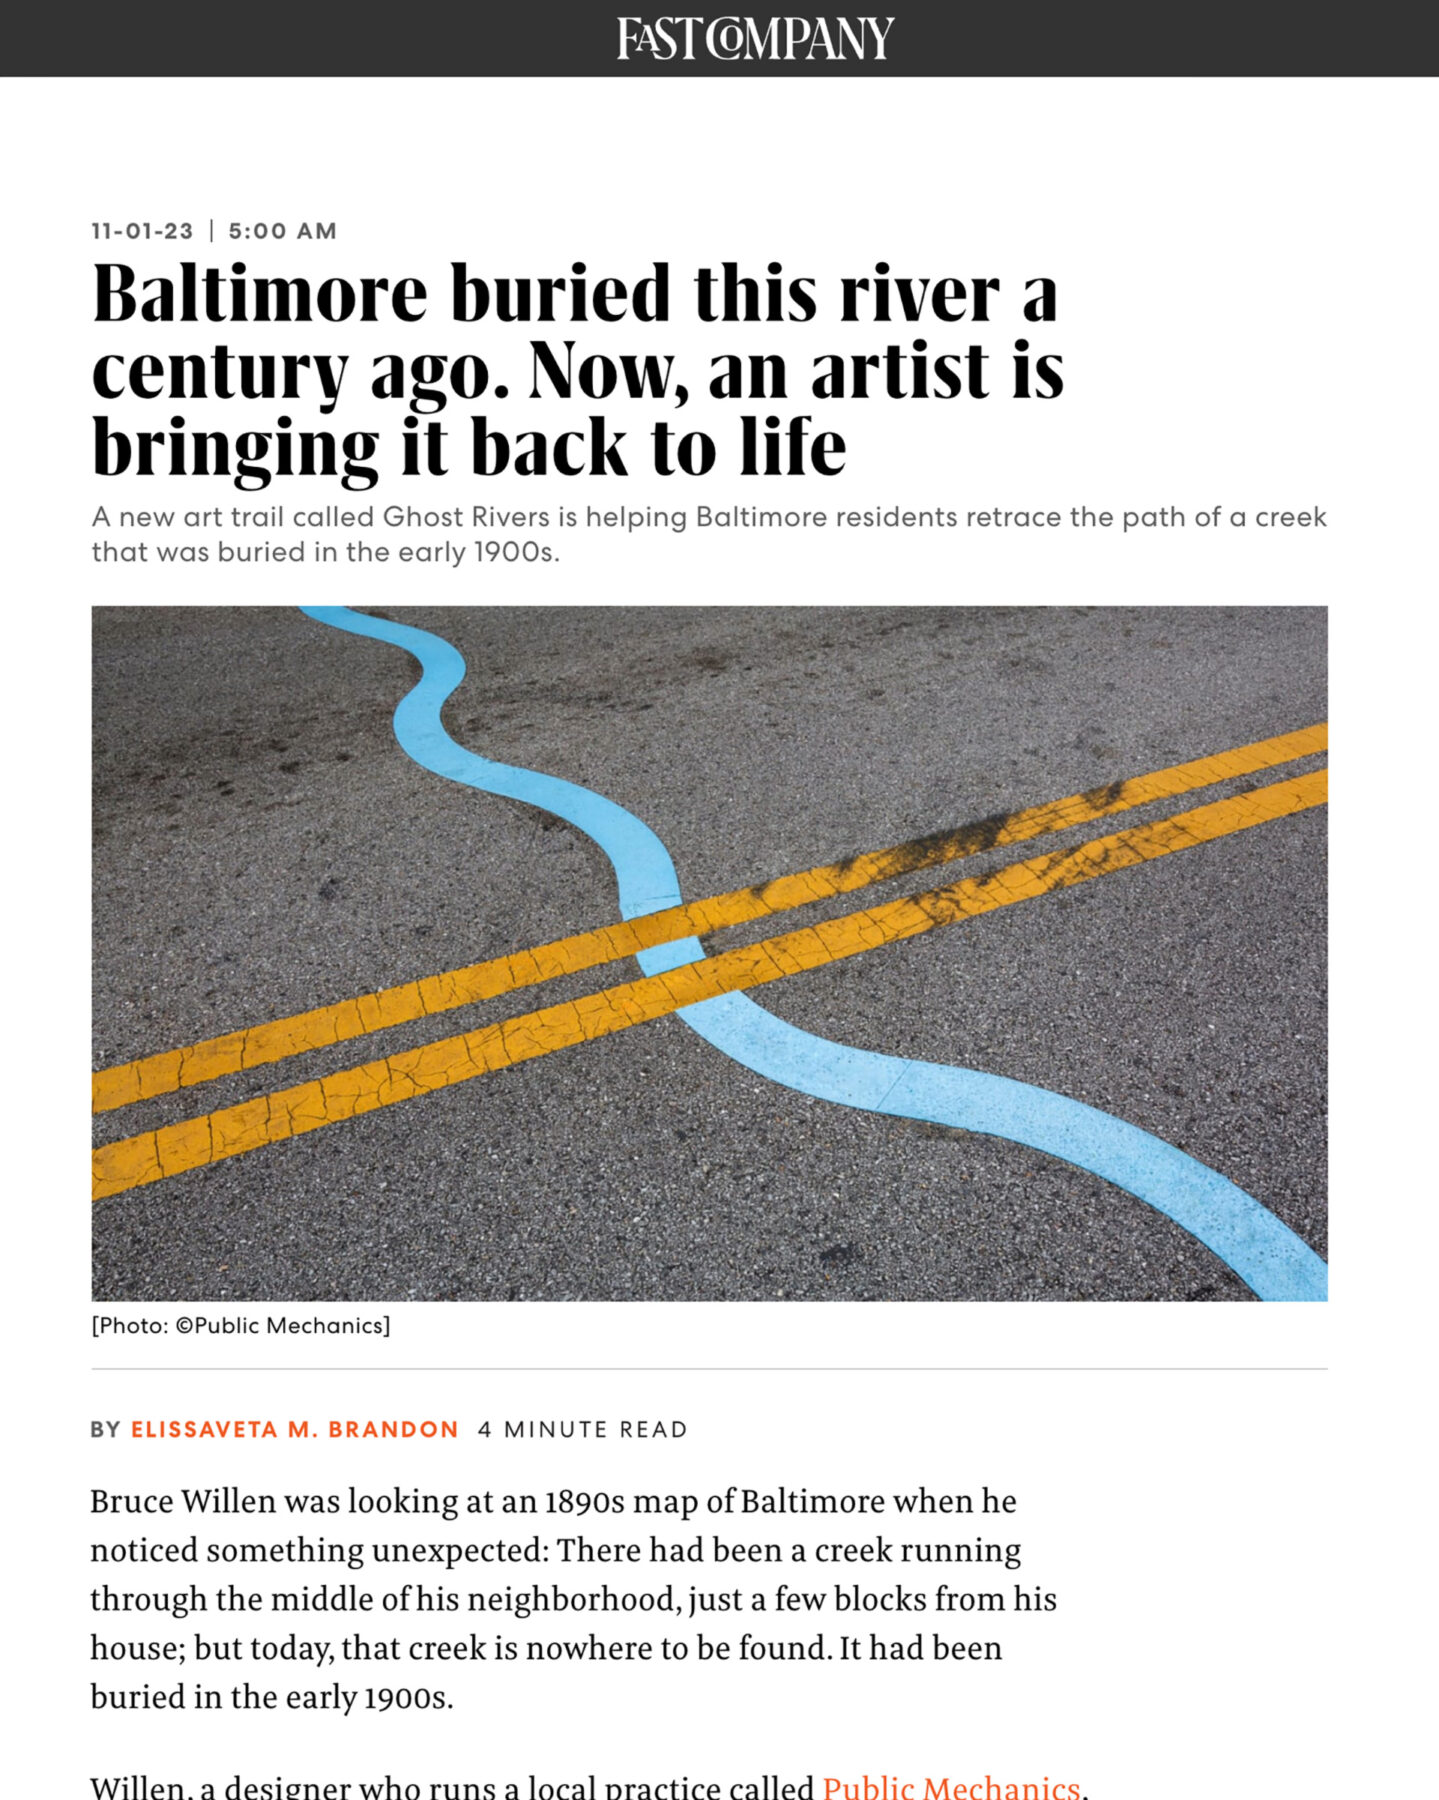 Fast Company feature article on Ghost Rivers — Baltimore buried this river a century ago. Now, an artist is bringing it back to life